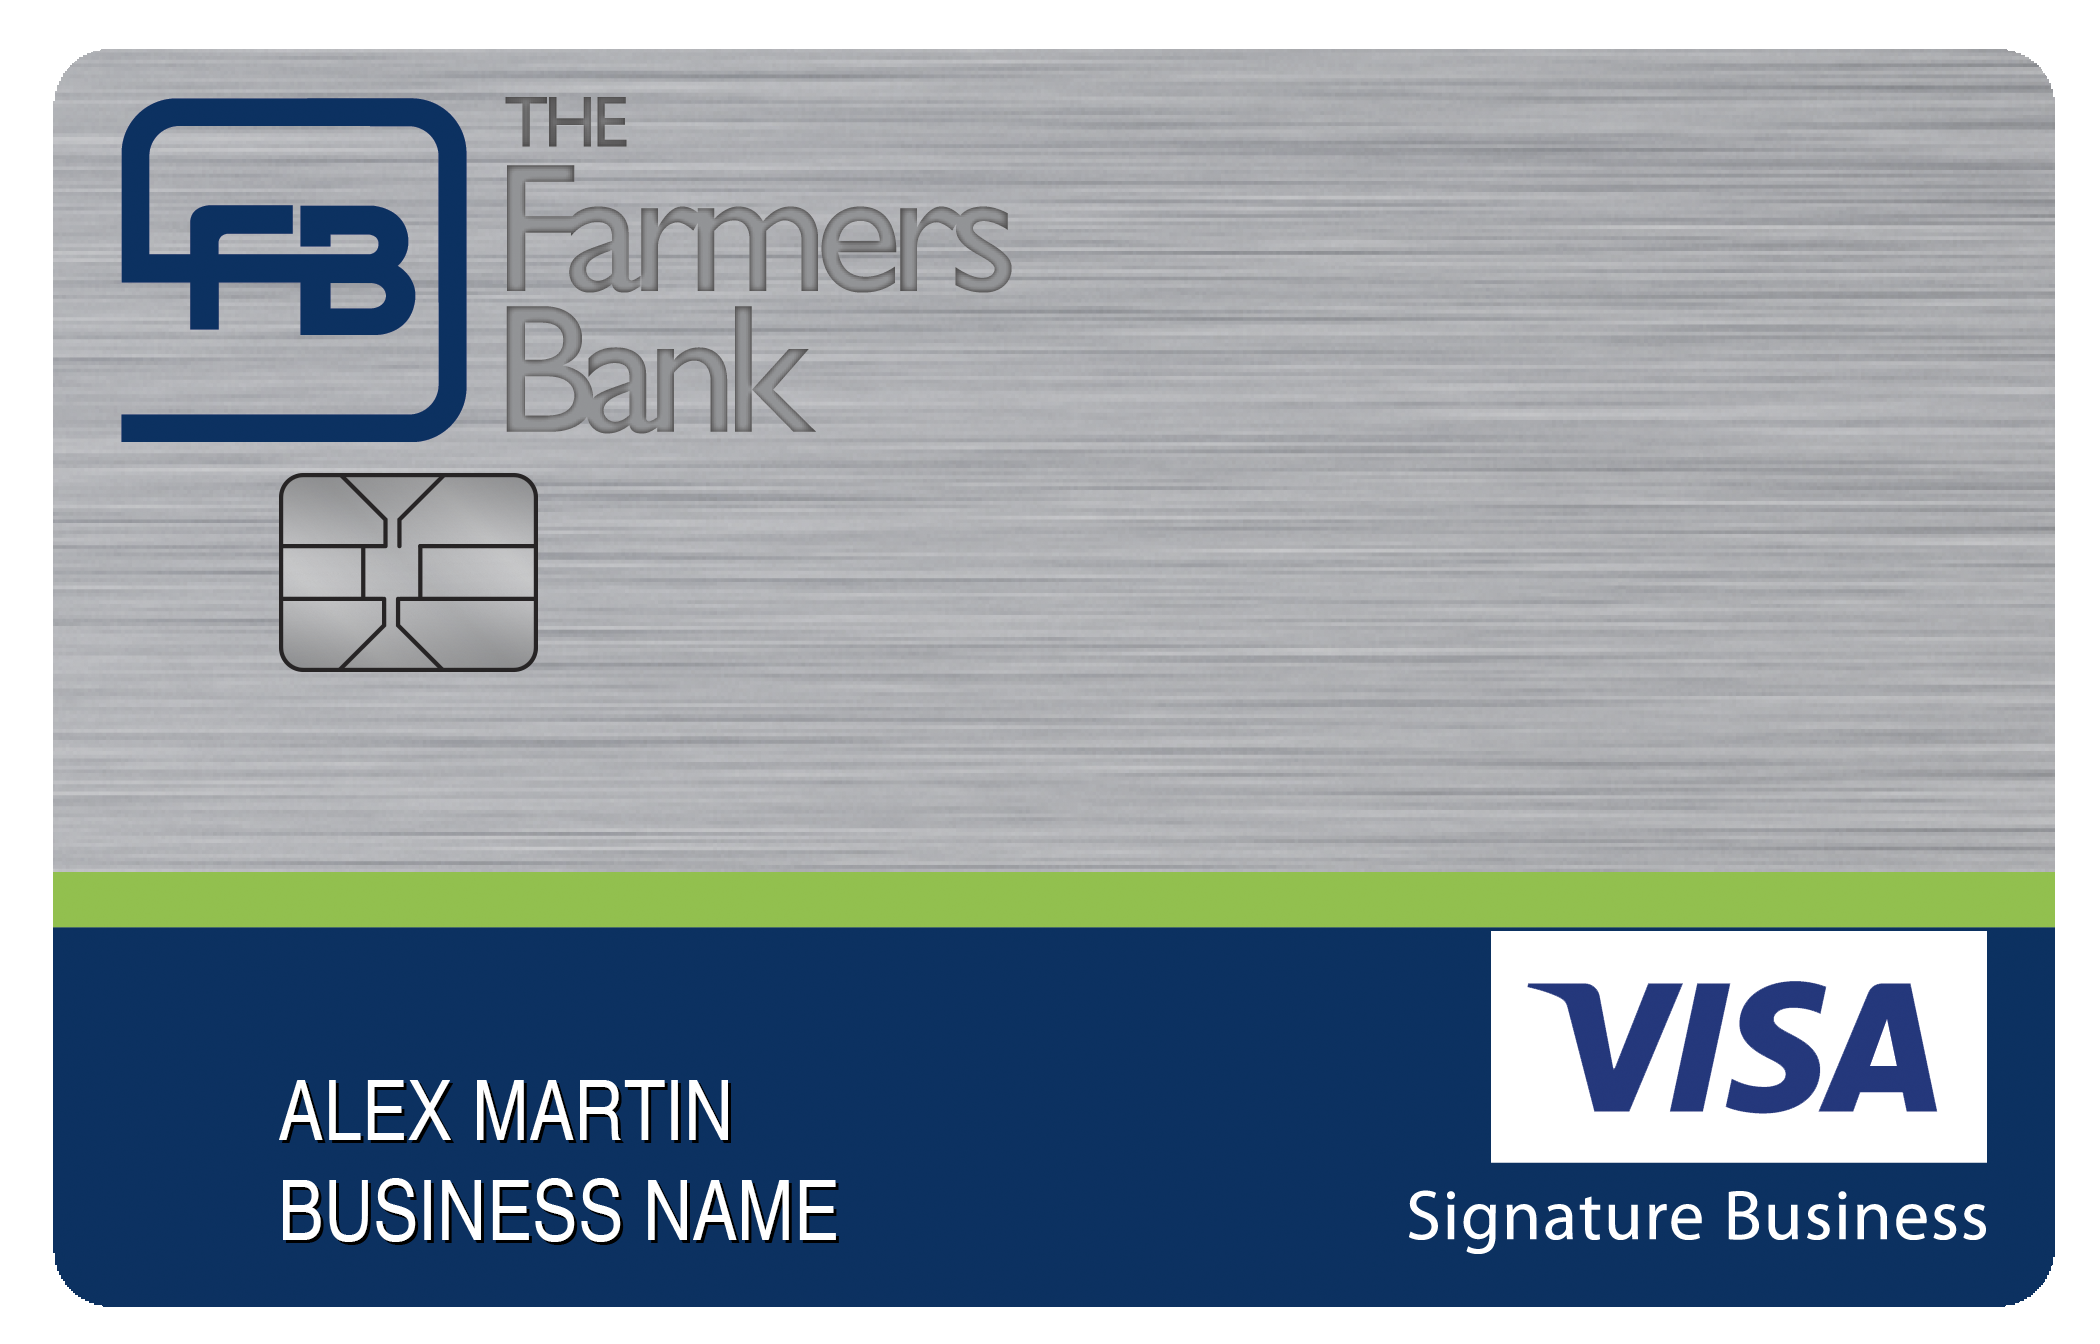 The Farmers Bank Smart Business Rewards Card